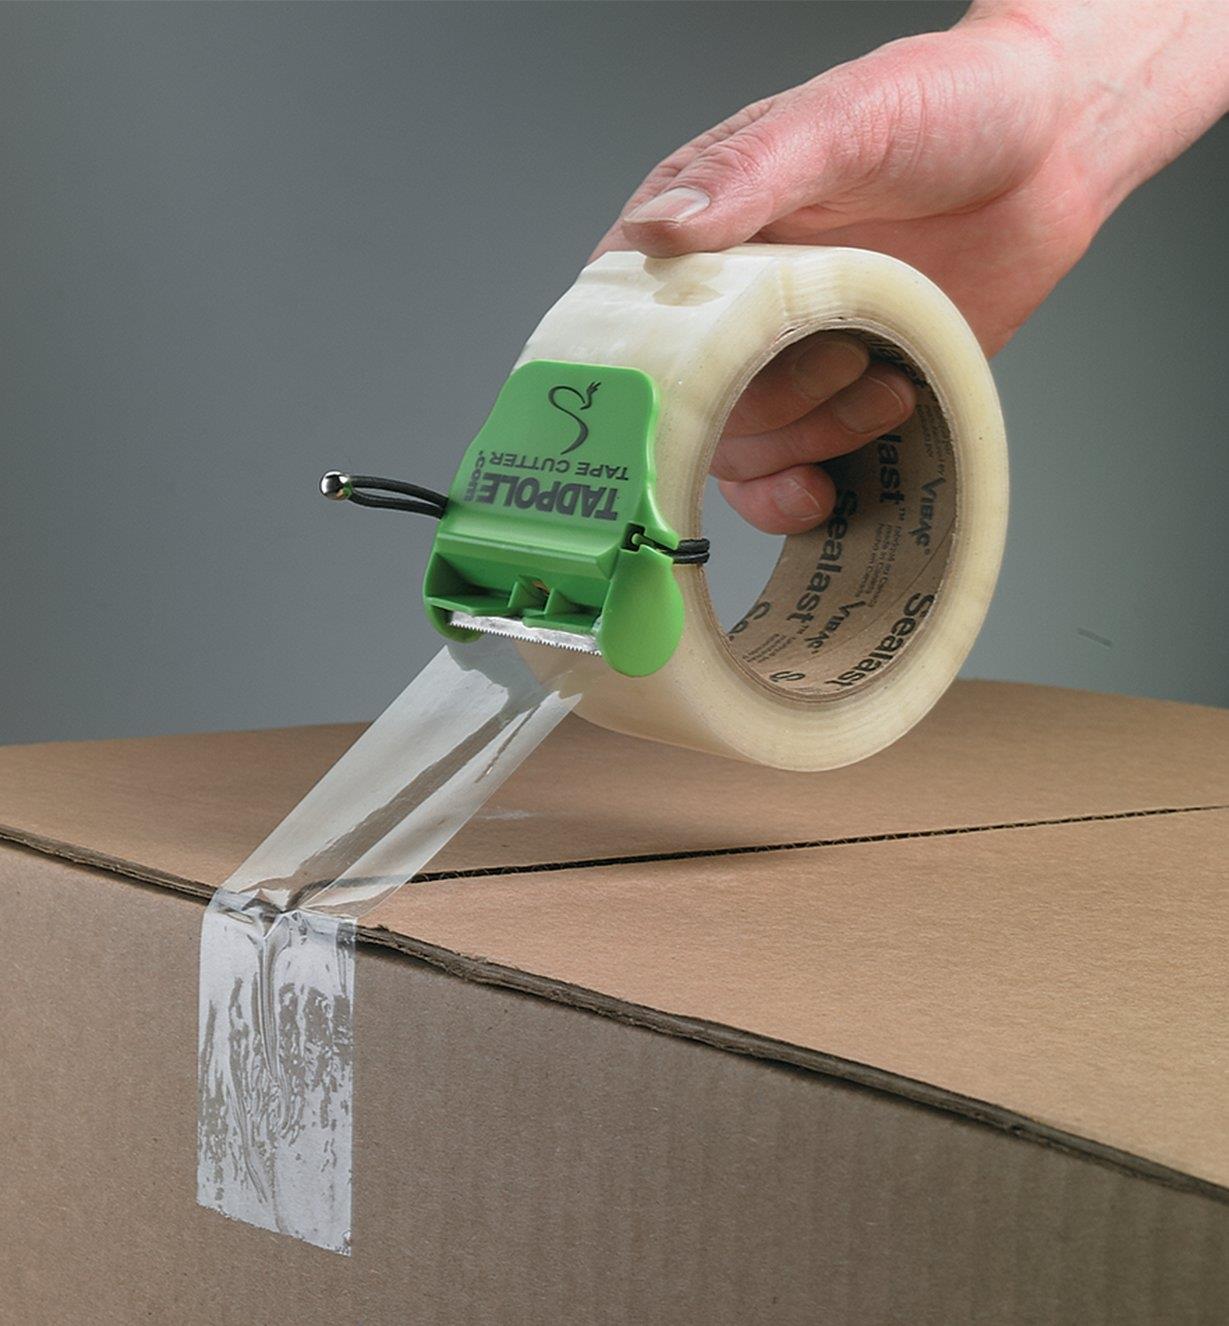 Taping a cardboard box shut using packing tape with the Tadpole Tape Cutter attached